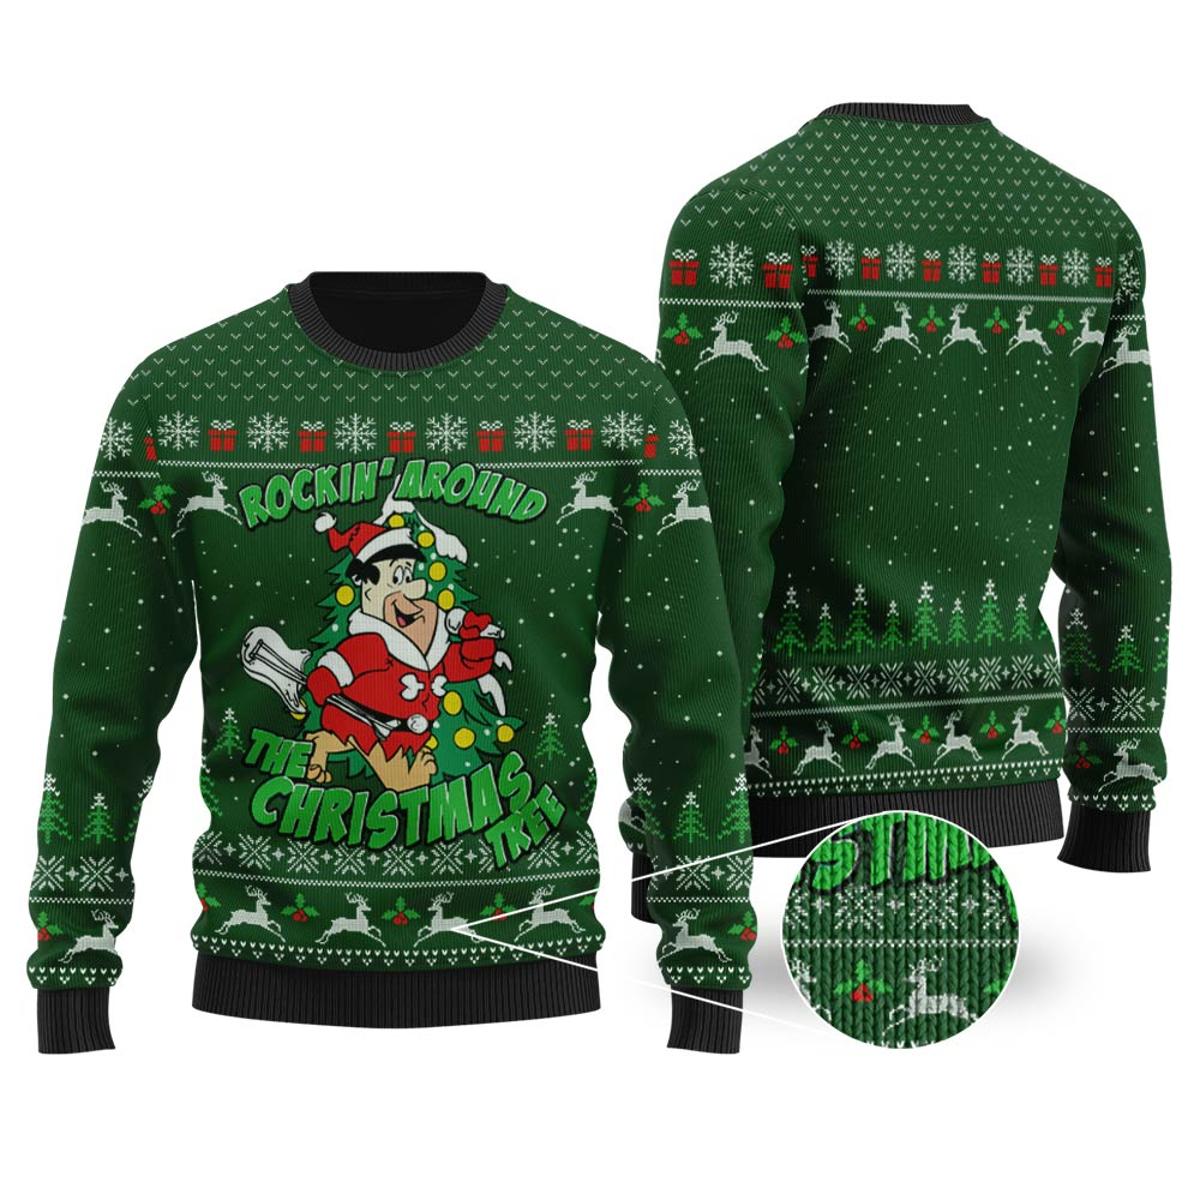 Max Stranger Things Ugly Sweater